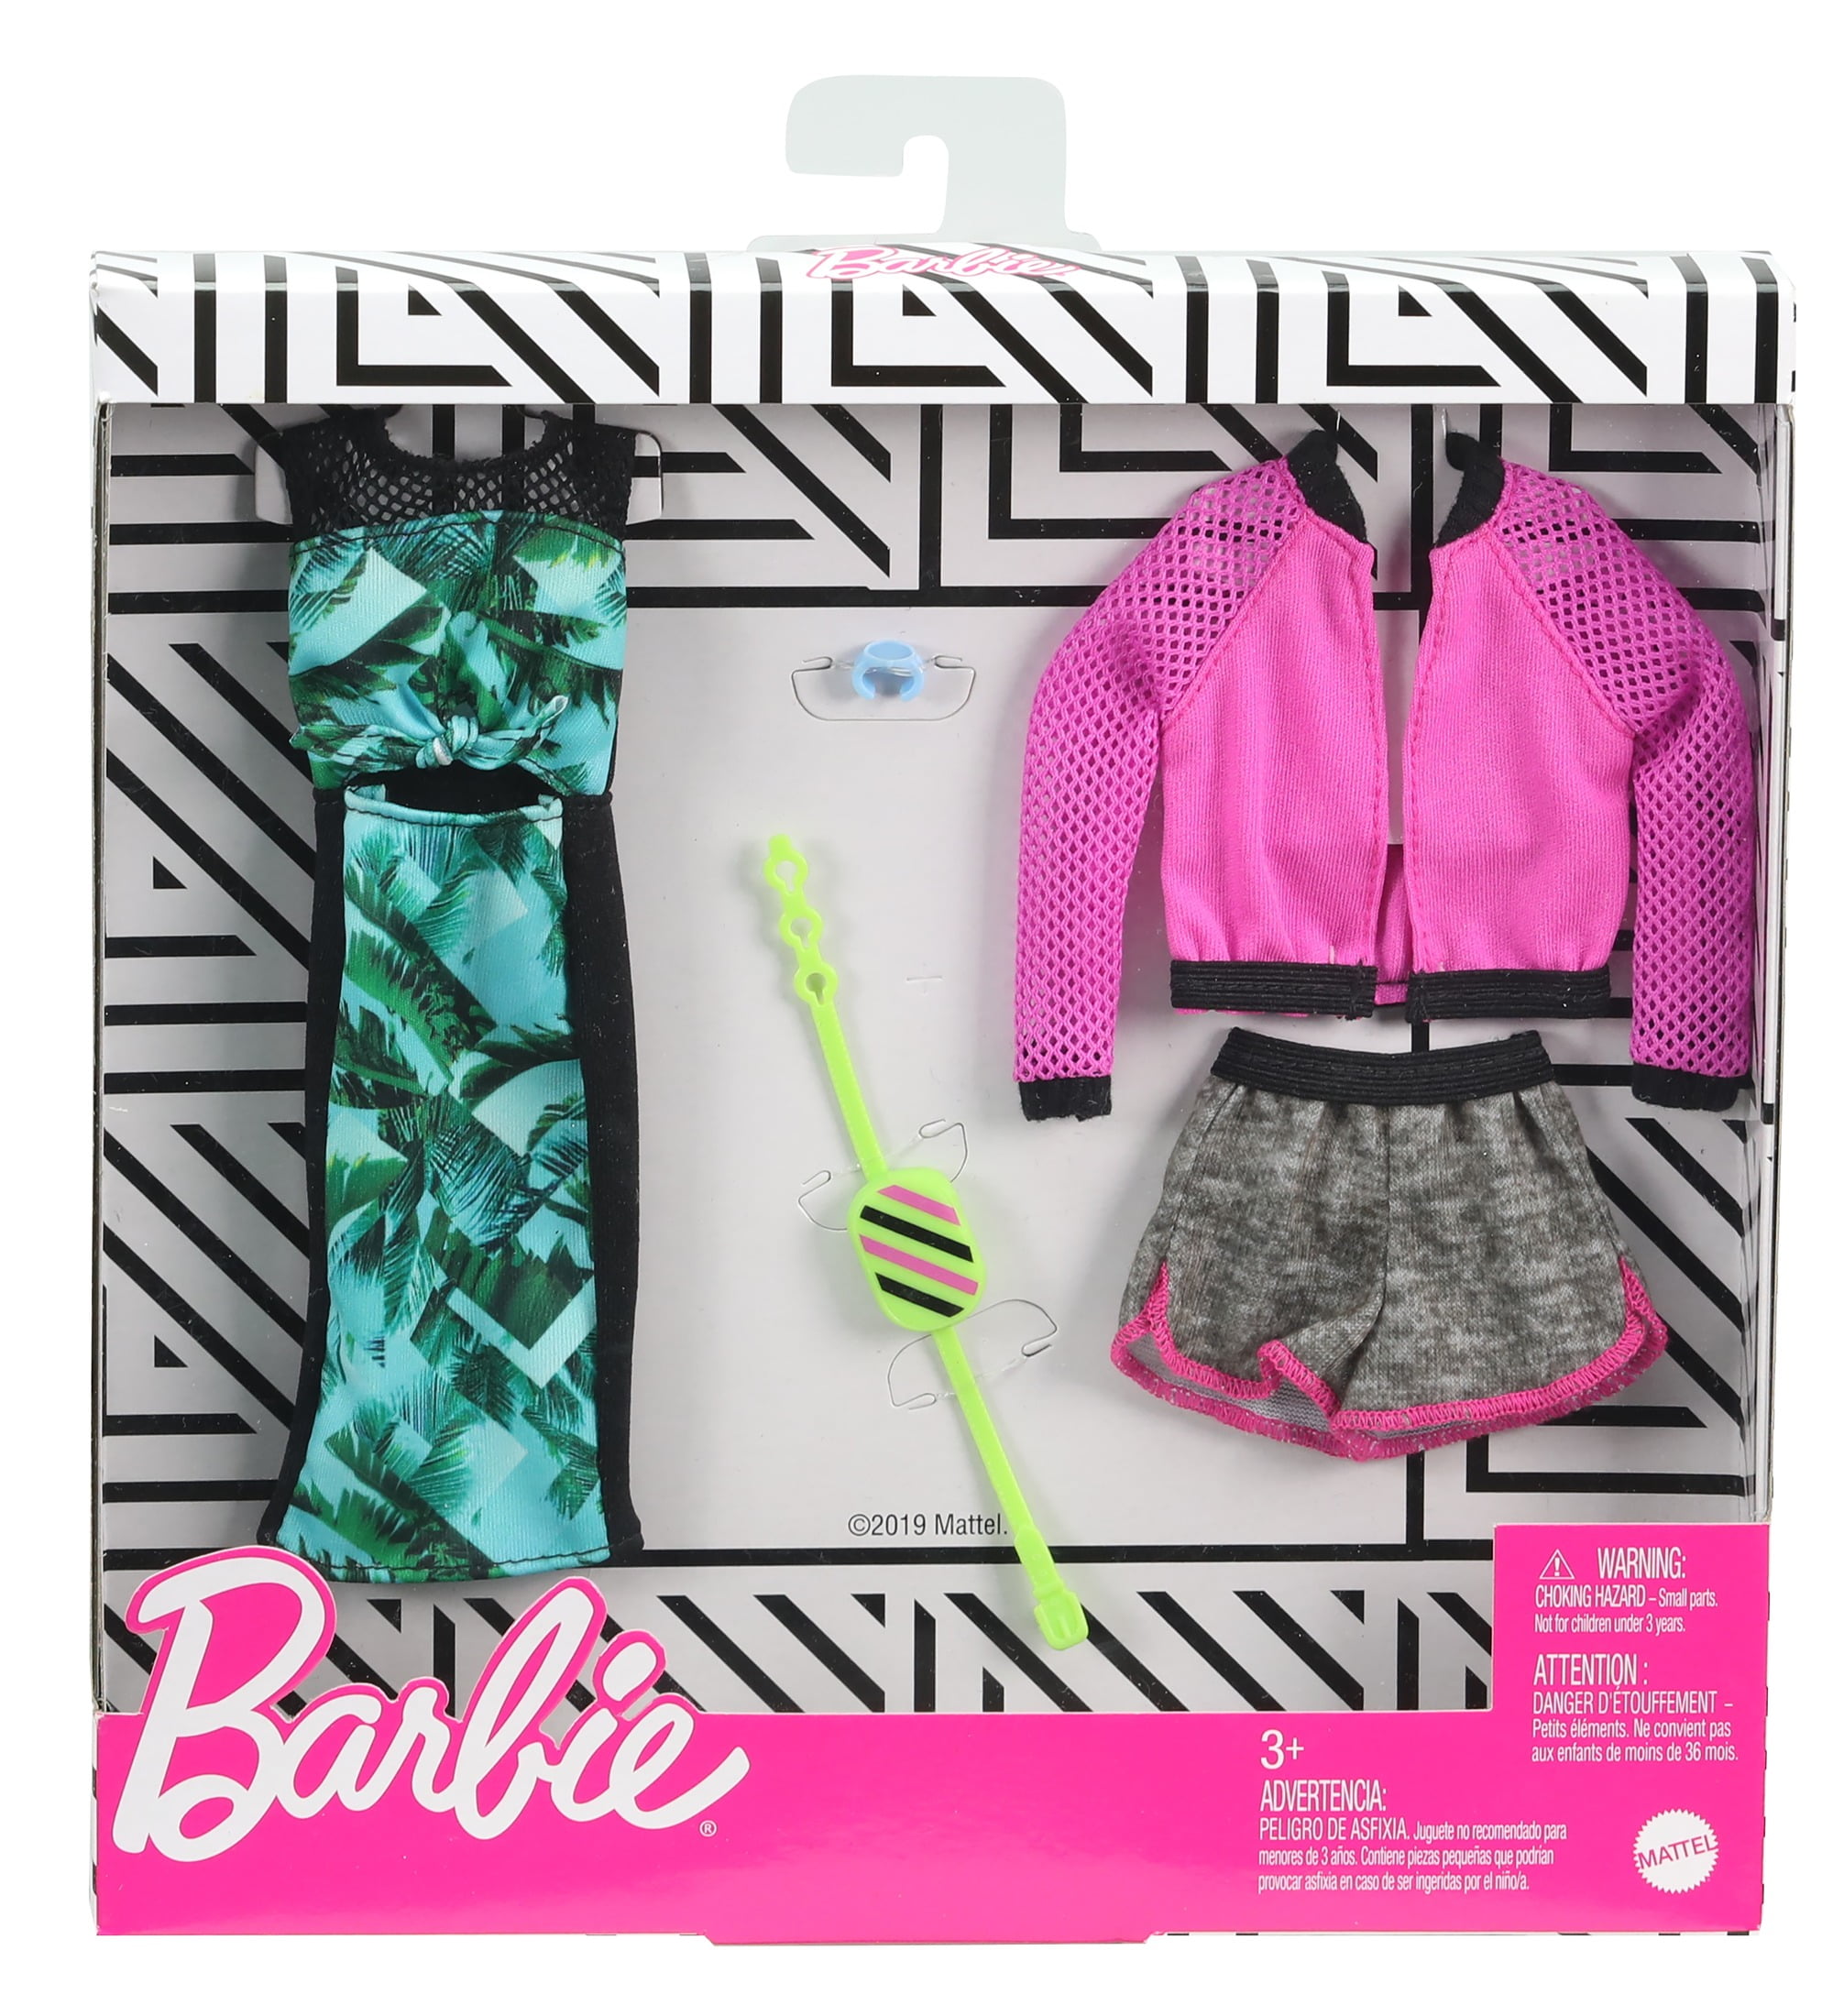 Barbie Fashions 2-Pack Clothing & Accessories Set Includes Pink 